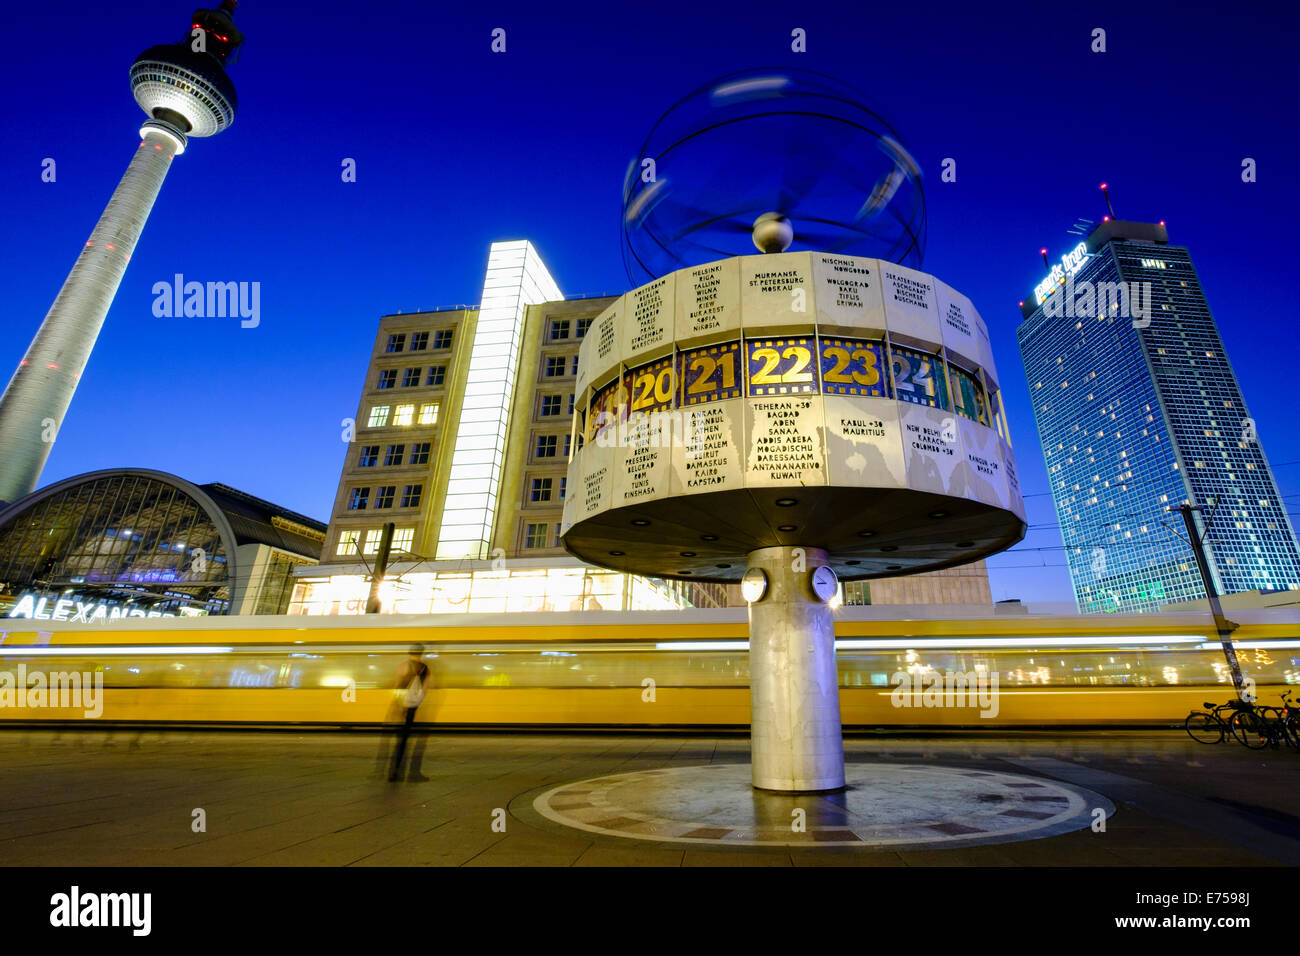 Night view of World Clock and tram at Alexanderplatz in Mitte Berlin Germany Stock Photo